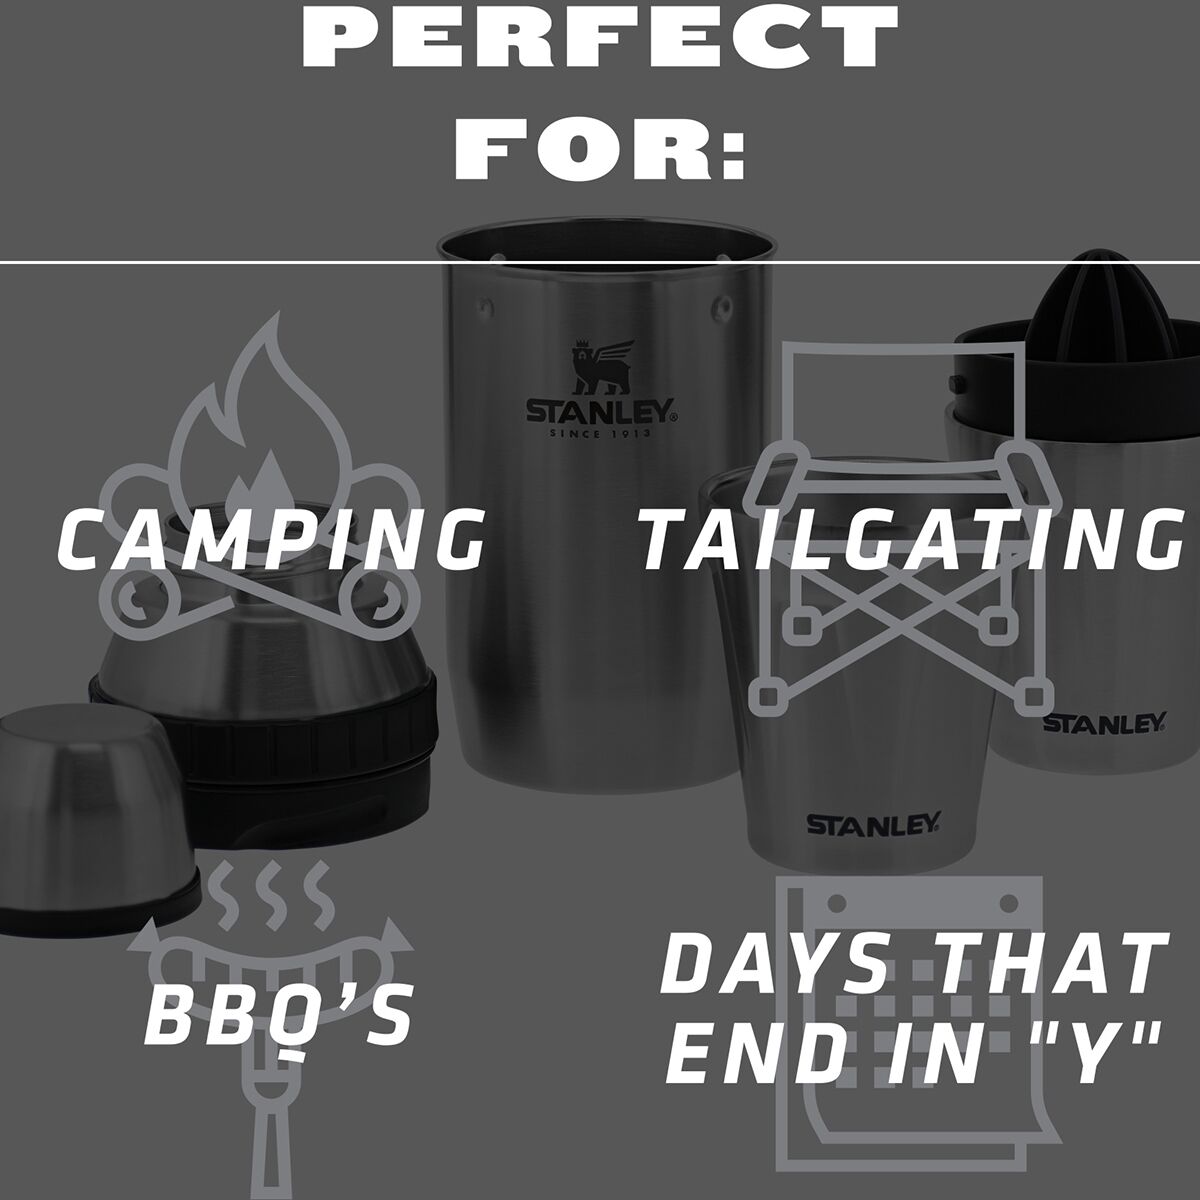 Stanley Adventure Happy Hour Cocktail Shaker Set - Hike & Camp